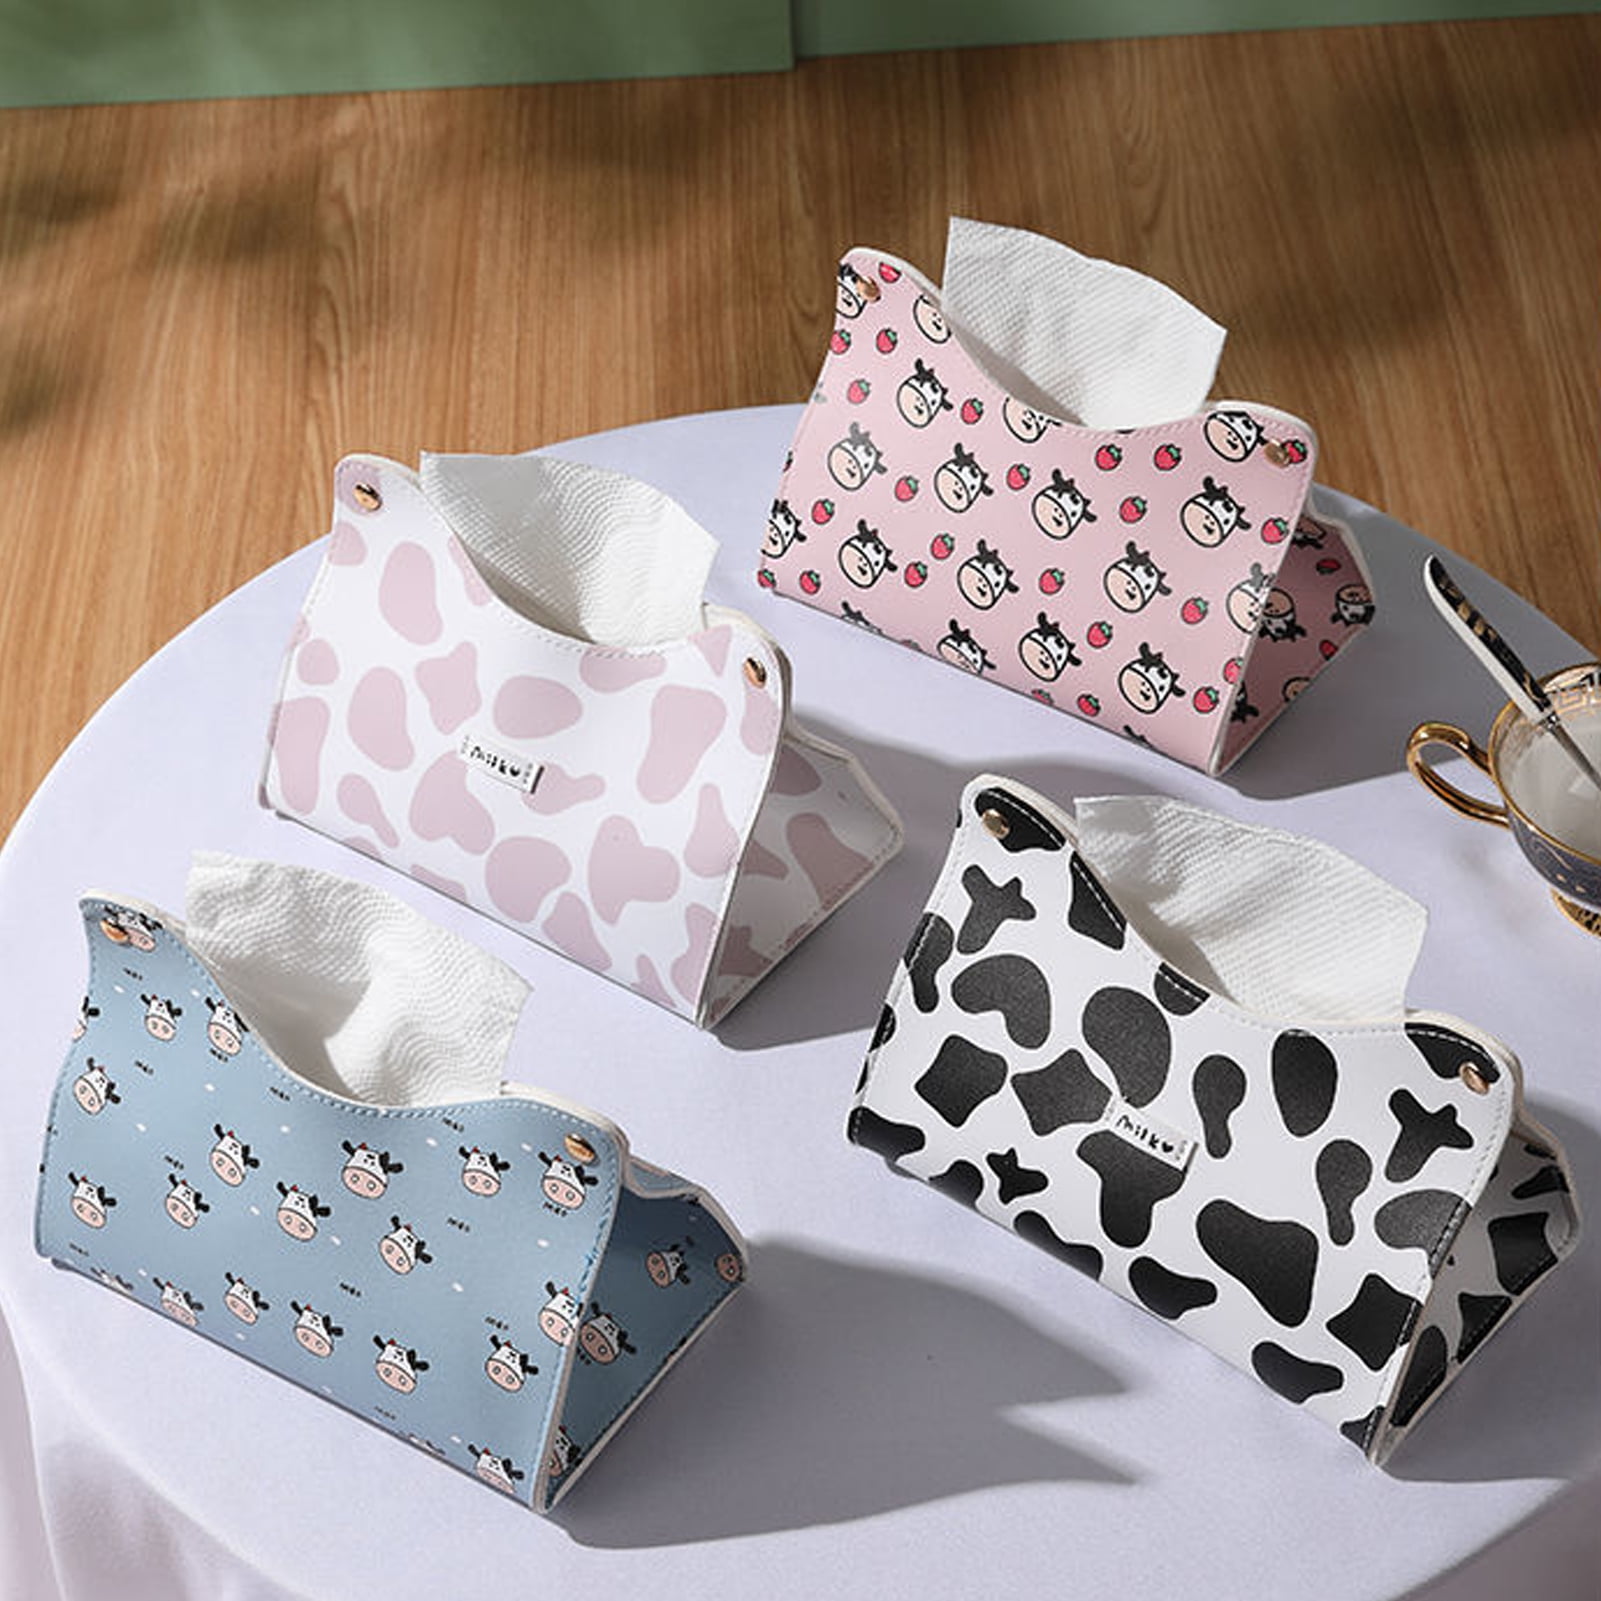 Tohuu Multifunctional Car Tissue Box Universal Tissue Boxes with 2 Folding Cup  Holders Tissue Box With Cup Holder Design for Cars 8.5x6.9x4.5 Inch  kindness 